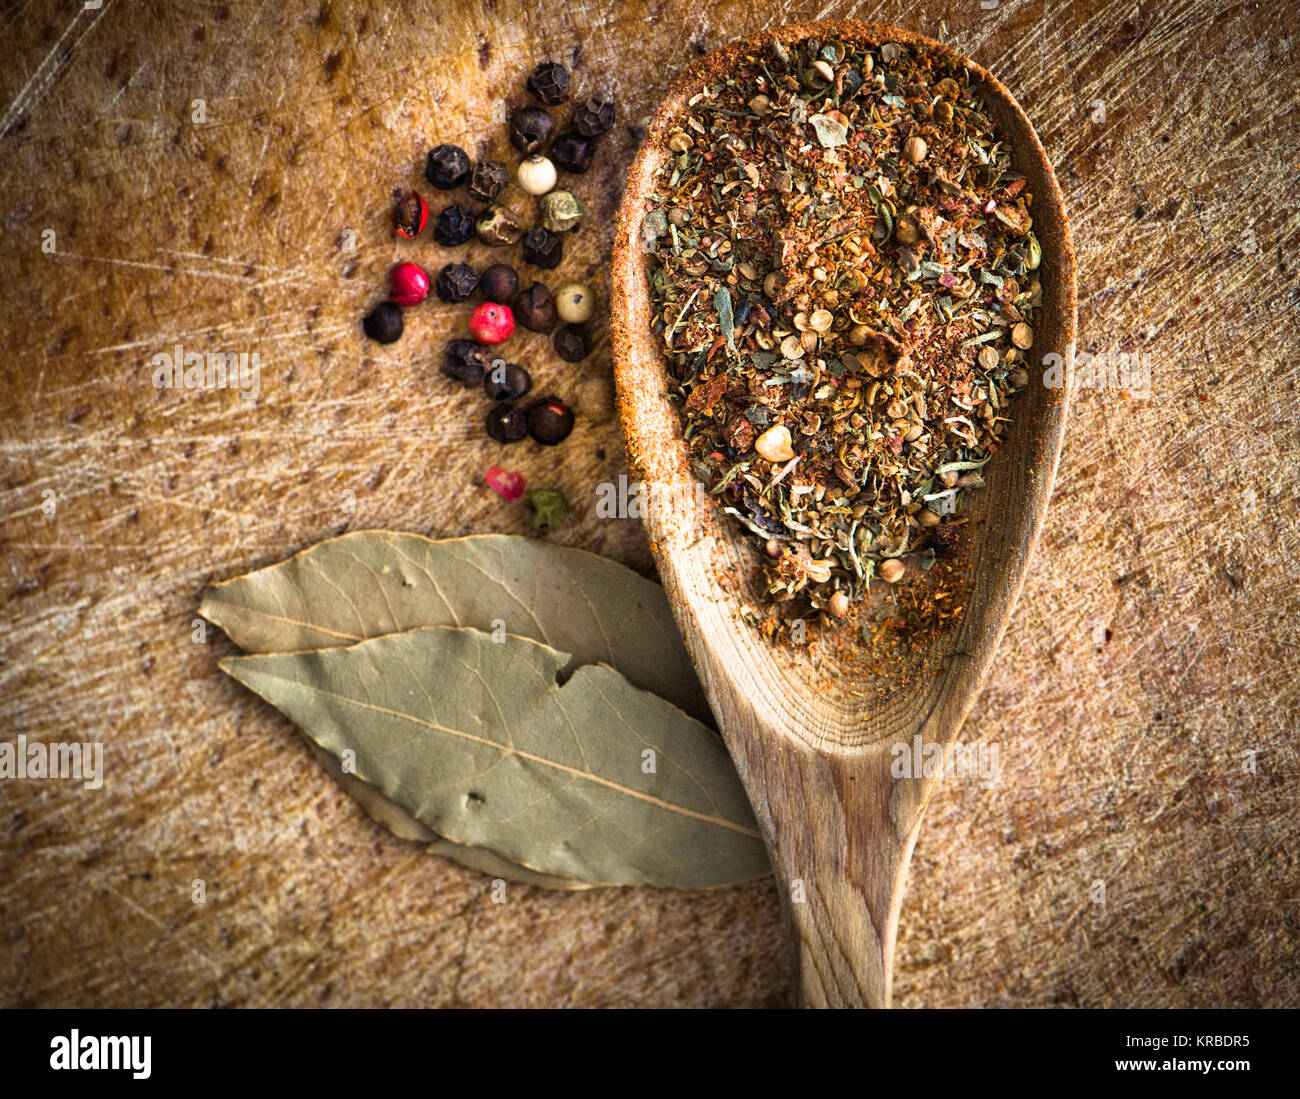 354,287 Spices Spoon Images, Stock Photos, 3D objects, & Vectors